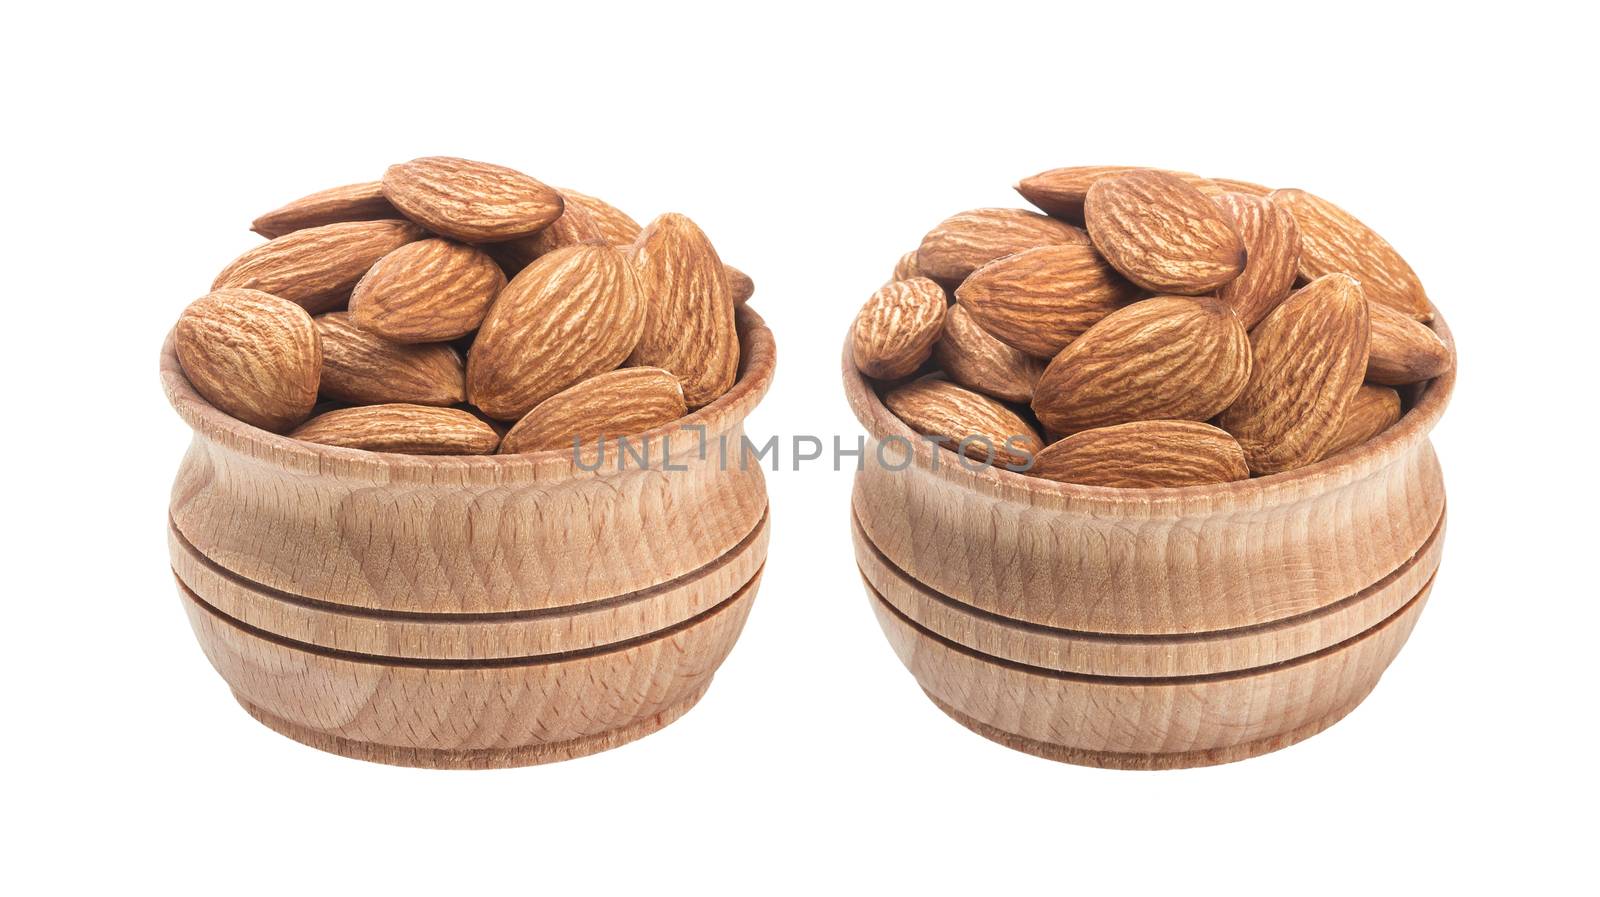 Almond nut in wooden bowl isolated on a white background by xamtiw